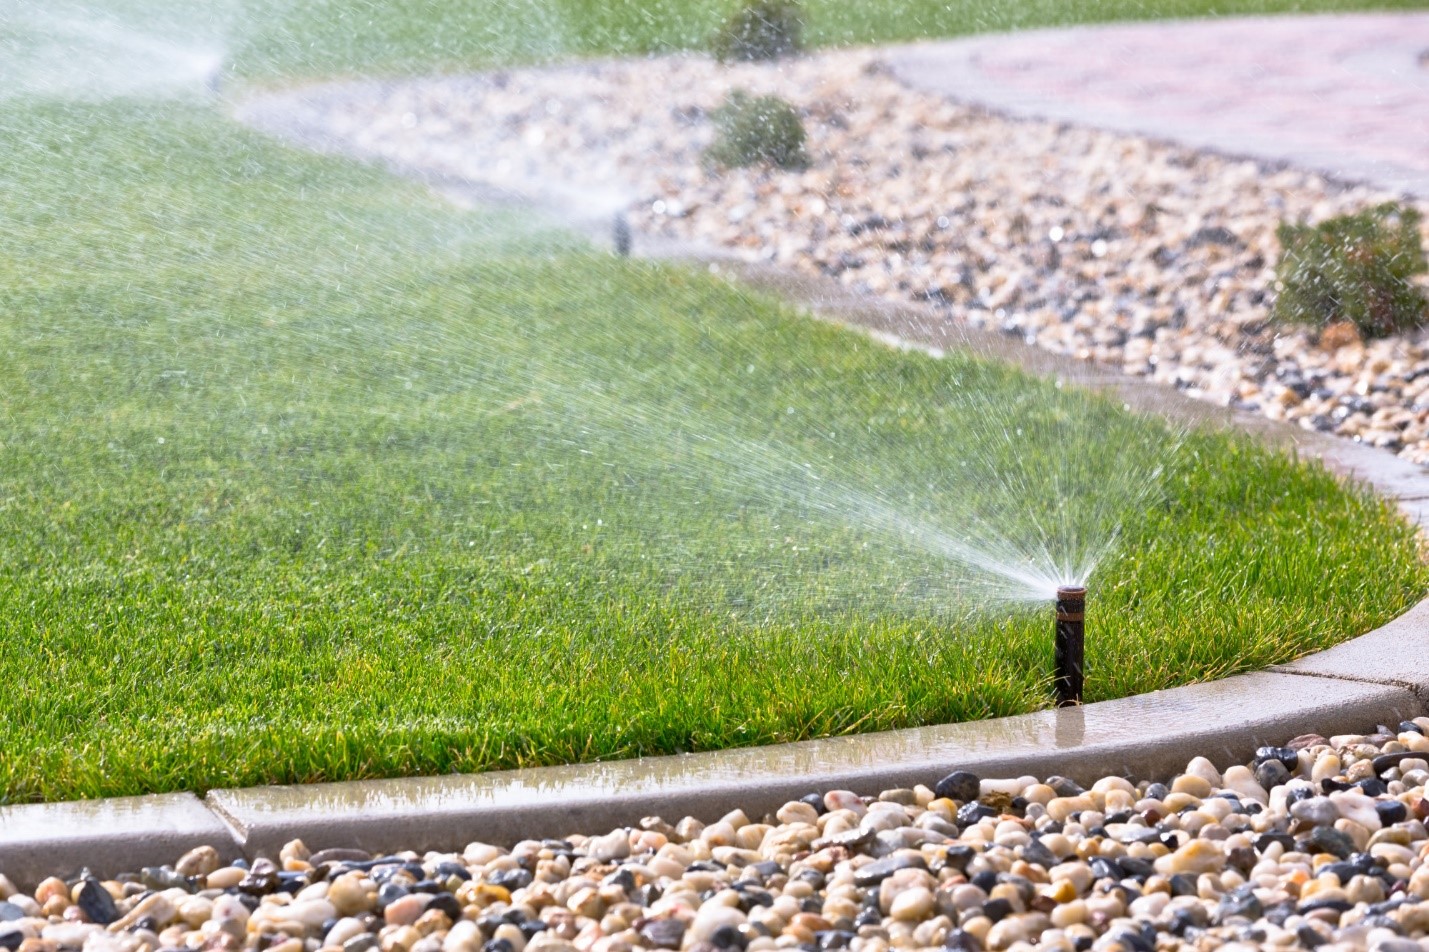 Installing a Sprinkler System: How to Easily Automate Your Garden